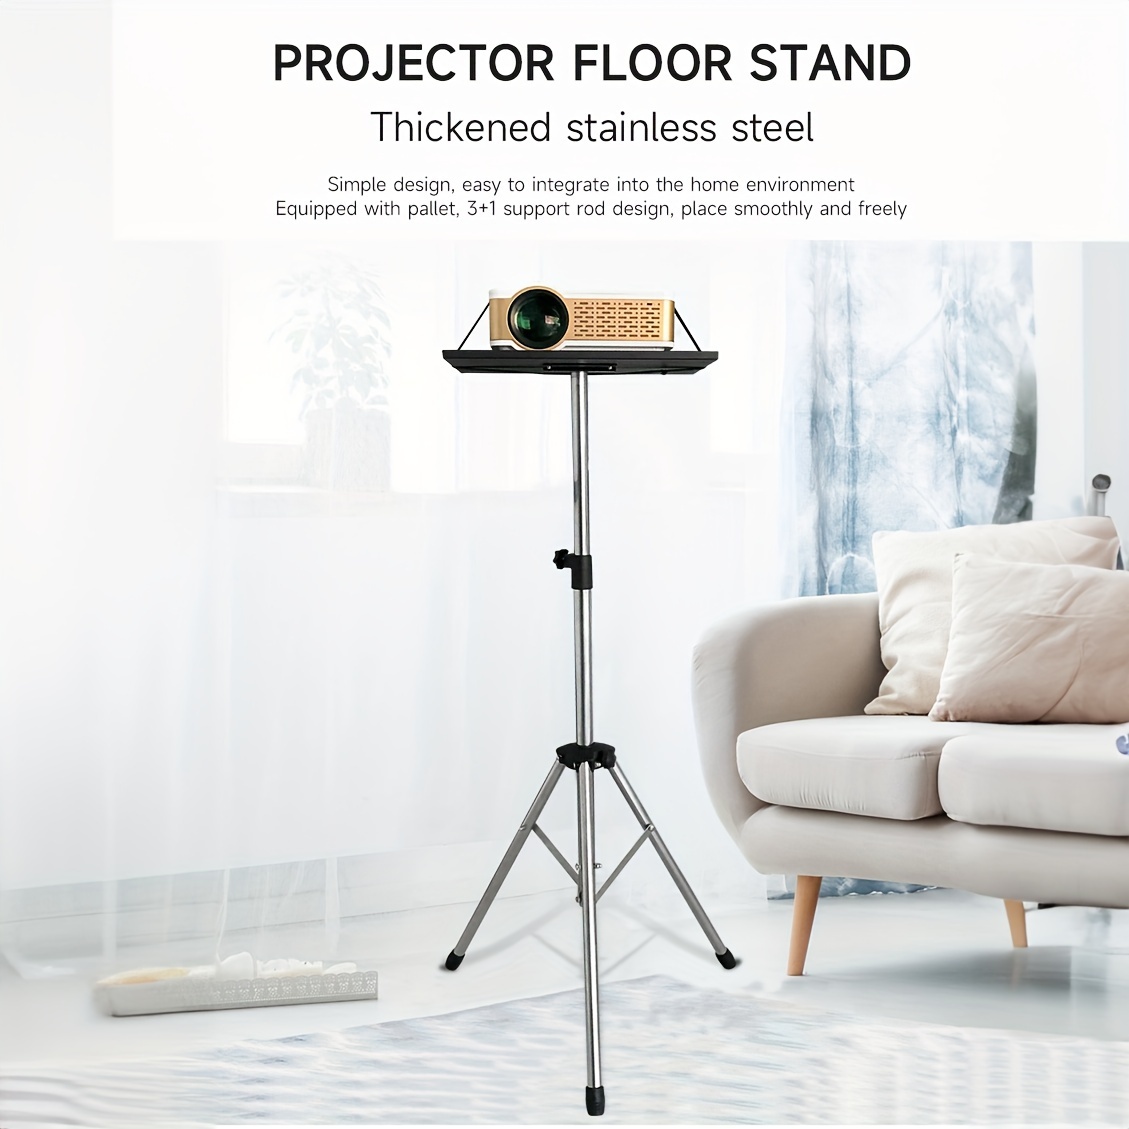 

1pc Stainless Projector Stand Tripod With Tray From 23.6"to 51.8", Adjustable Laptop Tripod Stand With Goose Neck For Speaker, Phone Holder, Laptop Floor Stand For Office, Home, Stage, Studio